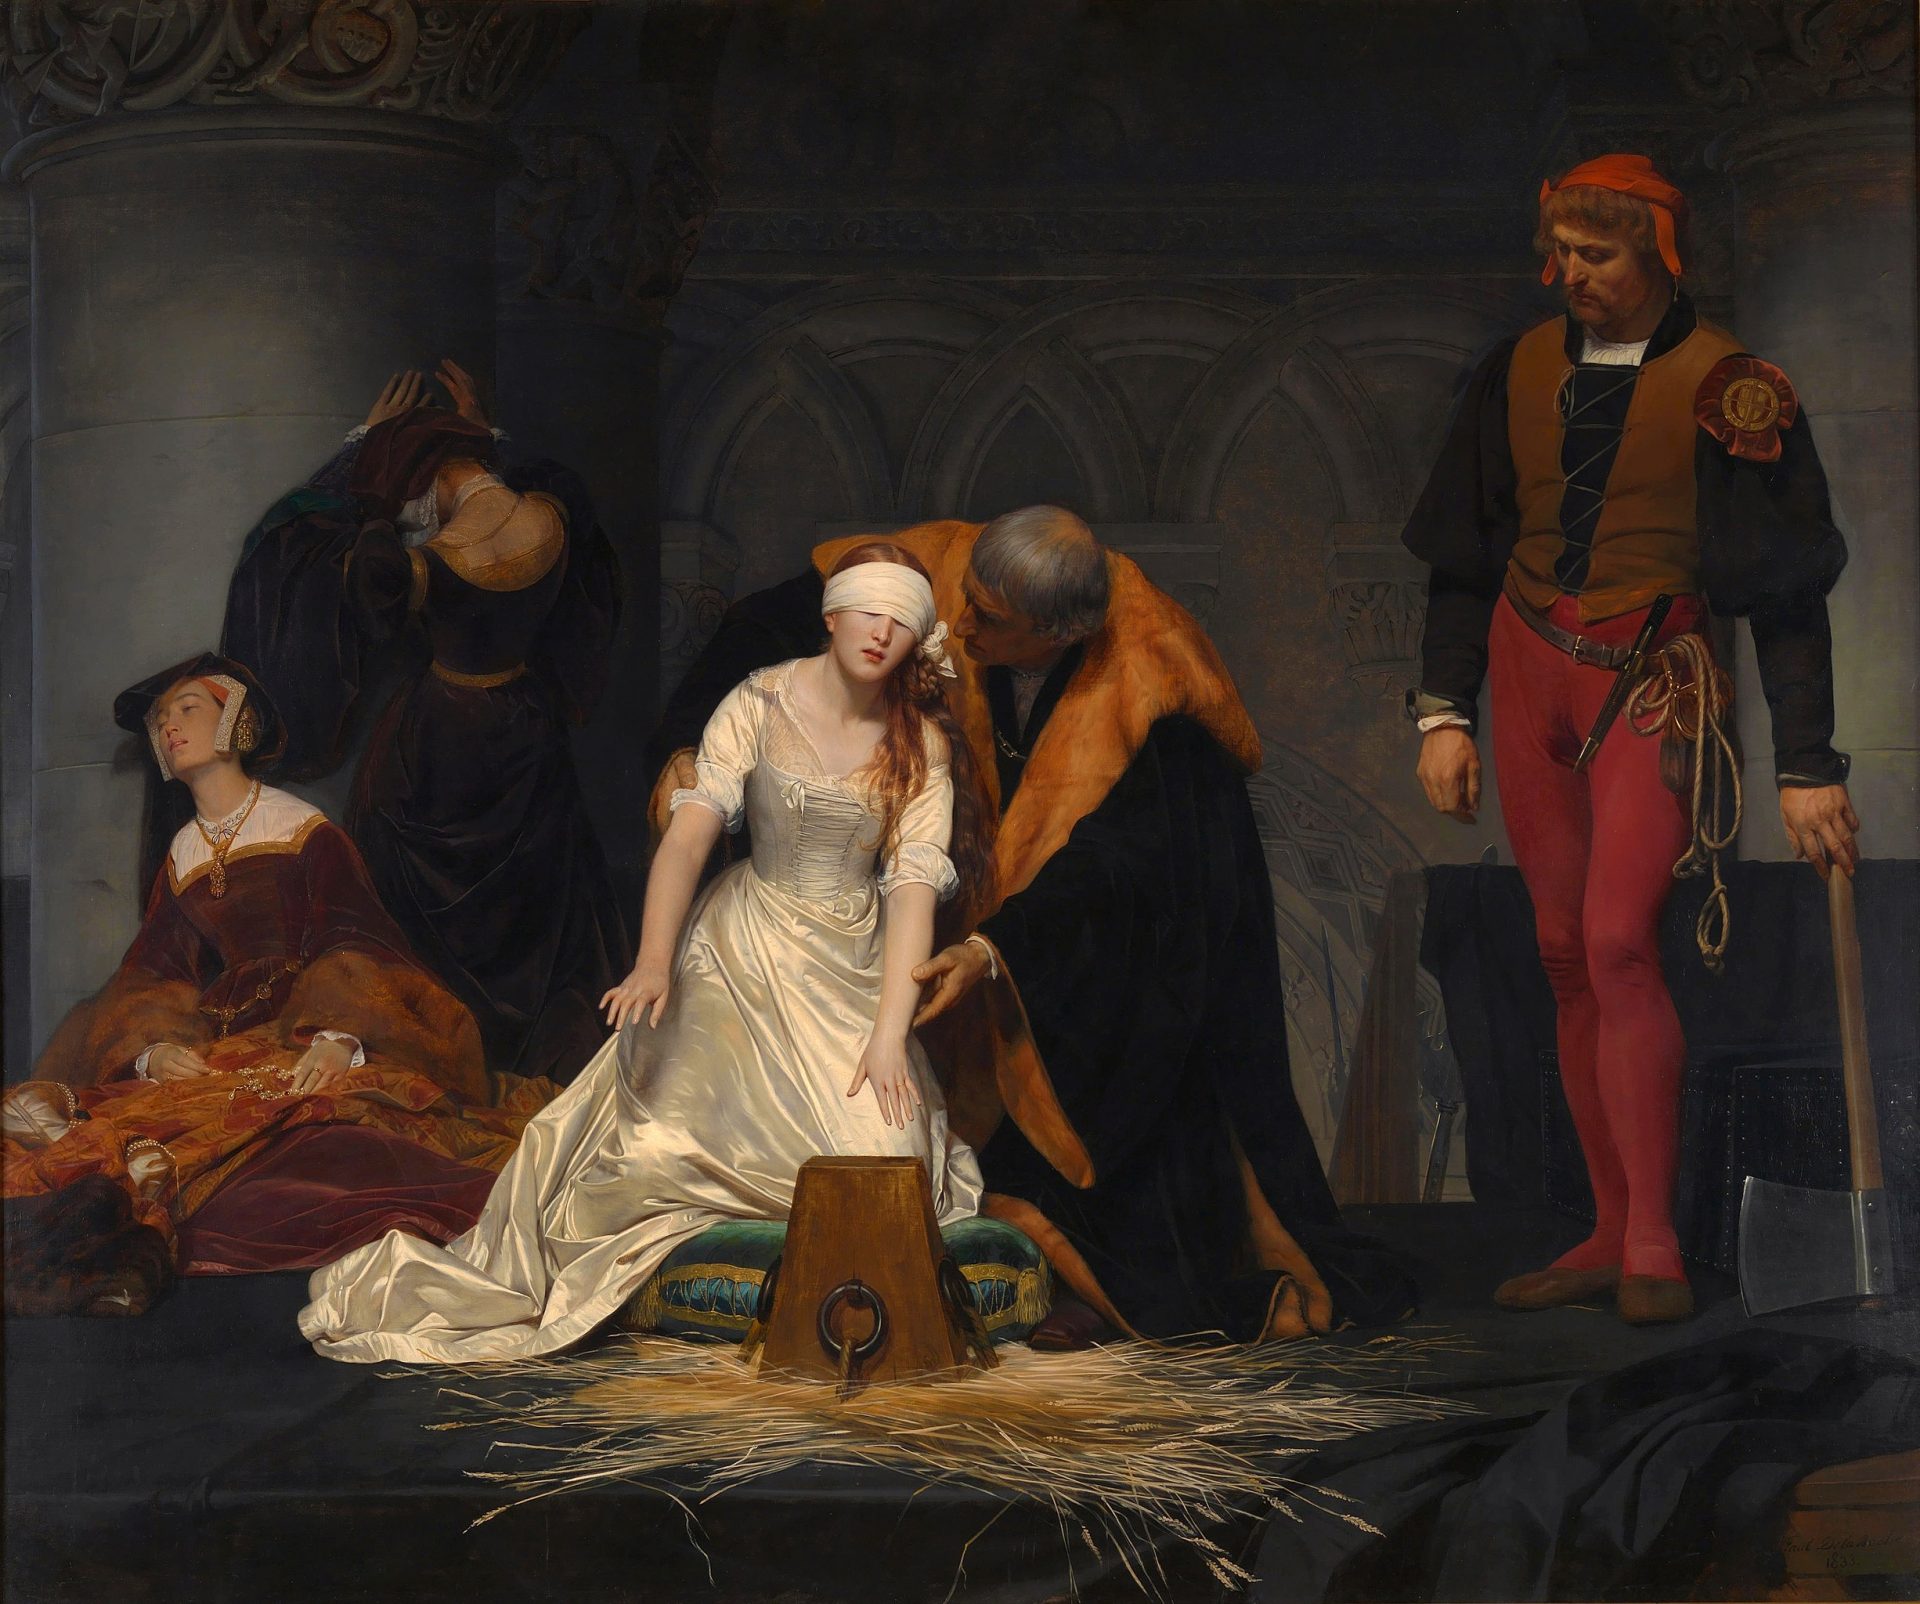 A painting depicting the execution of Lady Jane Gray. She has her eyes tied and is preparing to put her head on the chopping block.